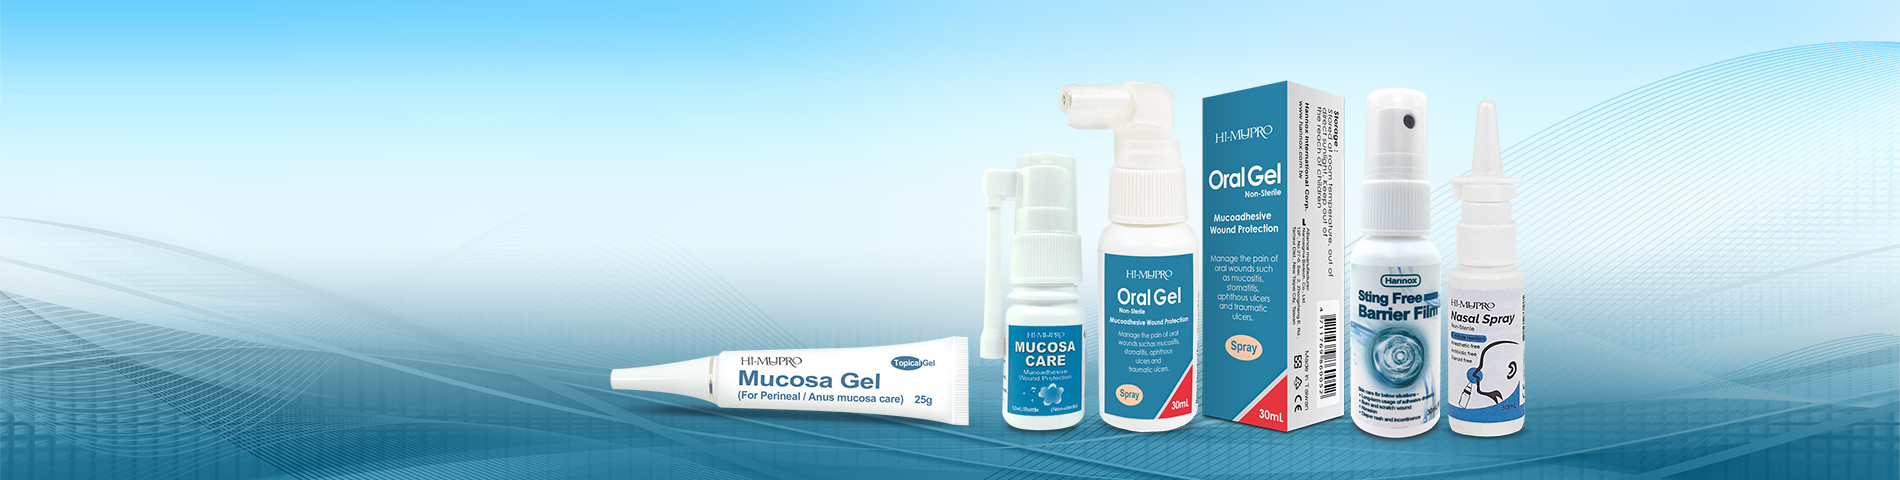 1-minute fast reaction. RADIATION MUCOSA CARE Anesthetic-free, Antibiotic-free, Steroid-free.